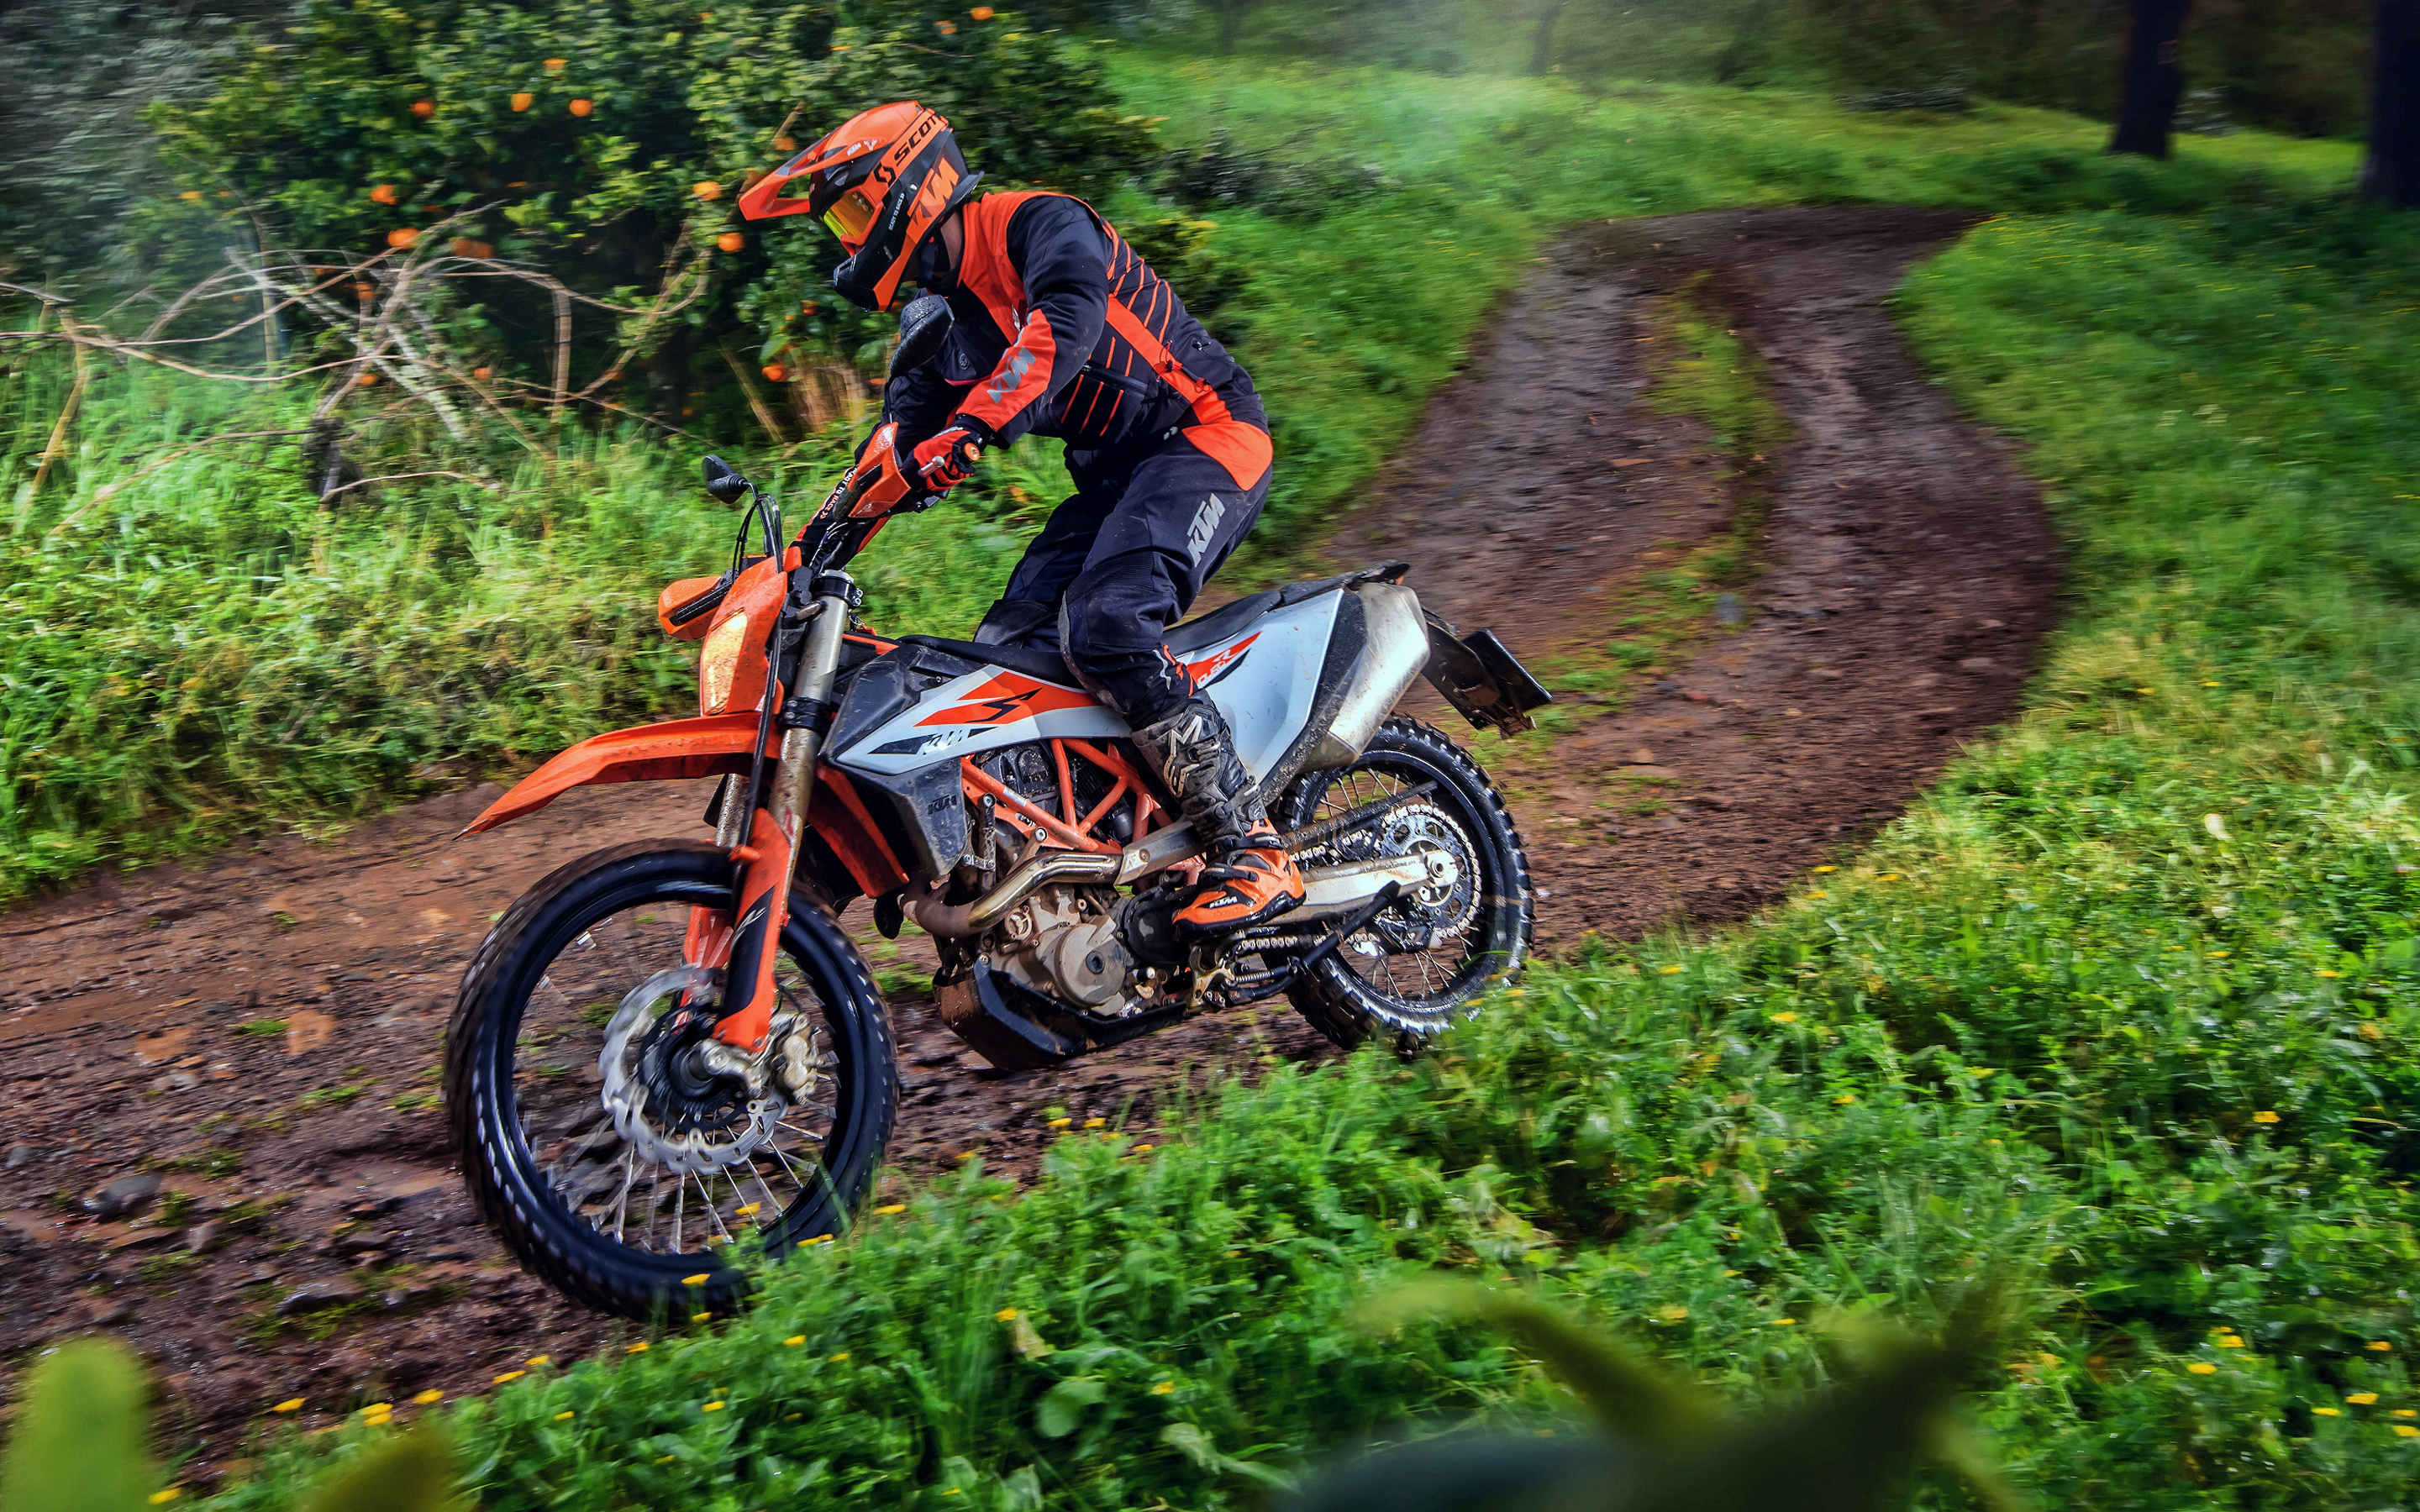 Enduro Motorbike: Motorcycle Sport, Extended Cross-Country, Off-Road Courses, KTM 2019. 2880x1800 HD Wallpaper.